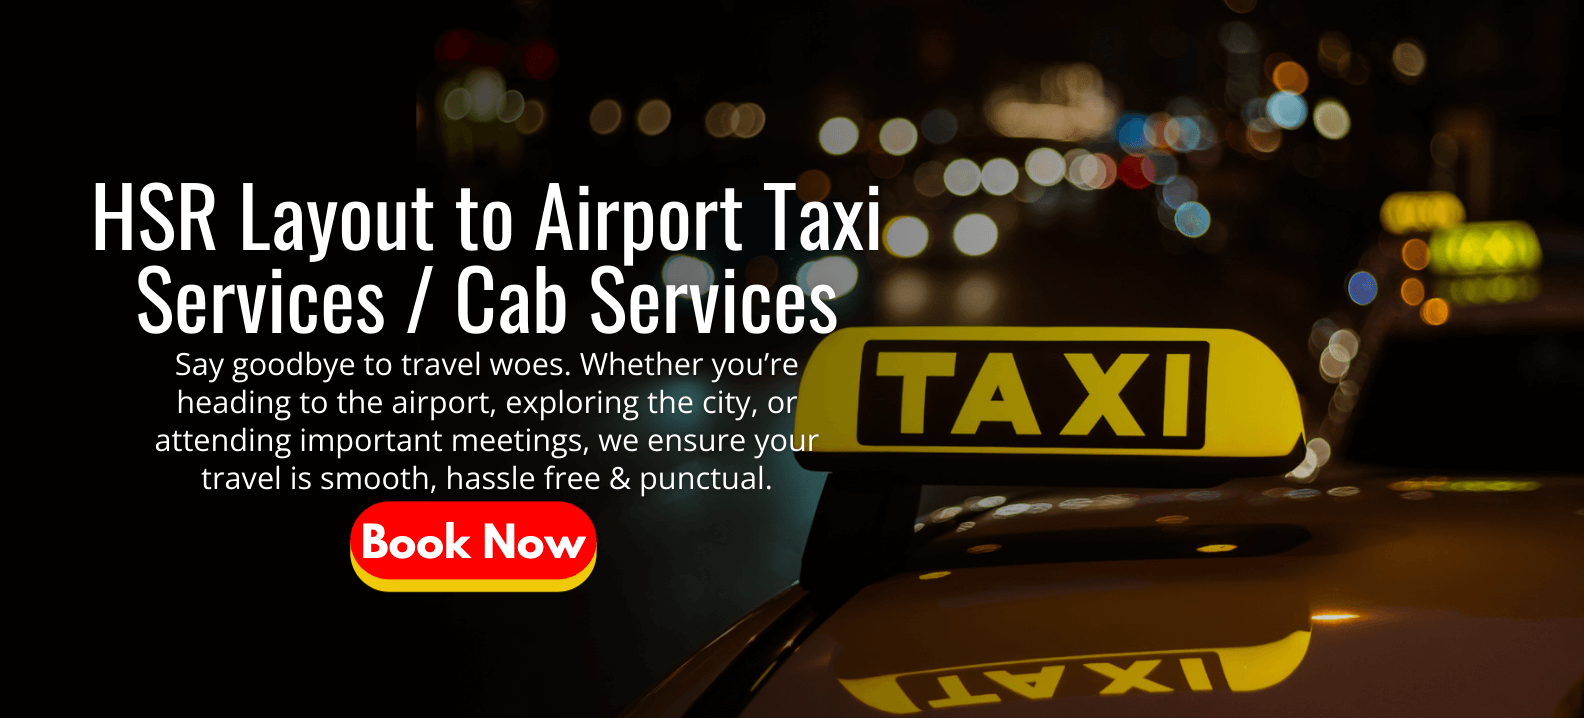 HSR Layout to Airport Taxi Services _ Cab Services